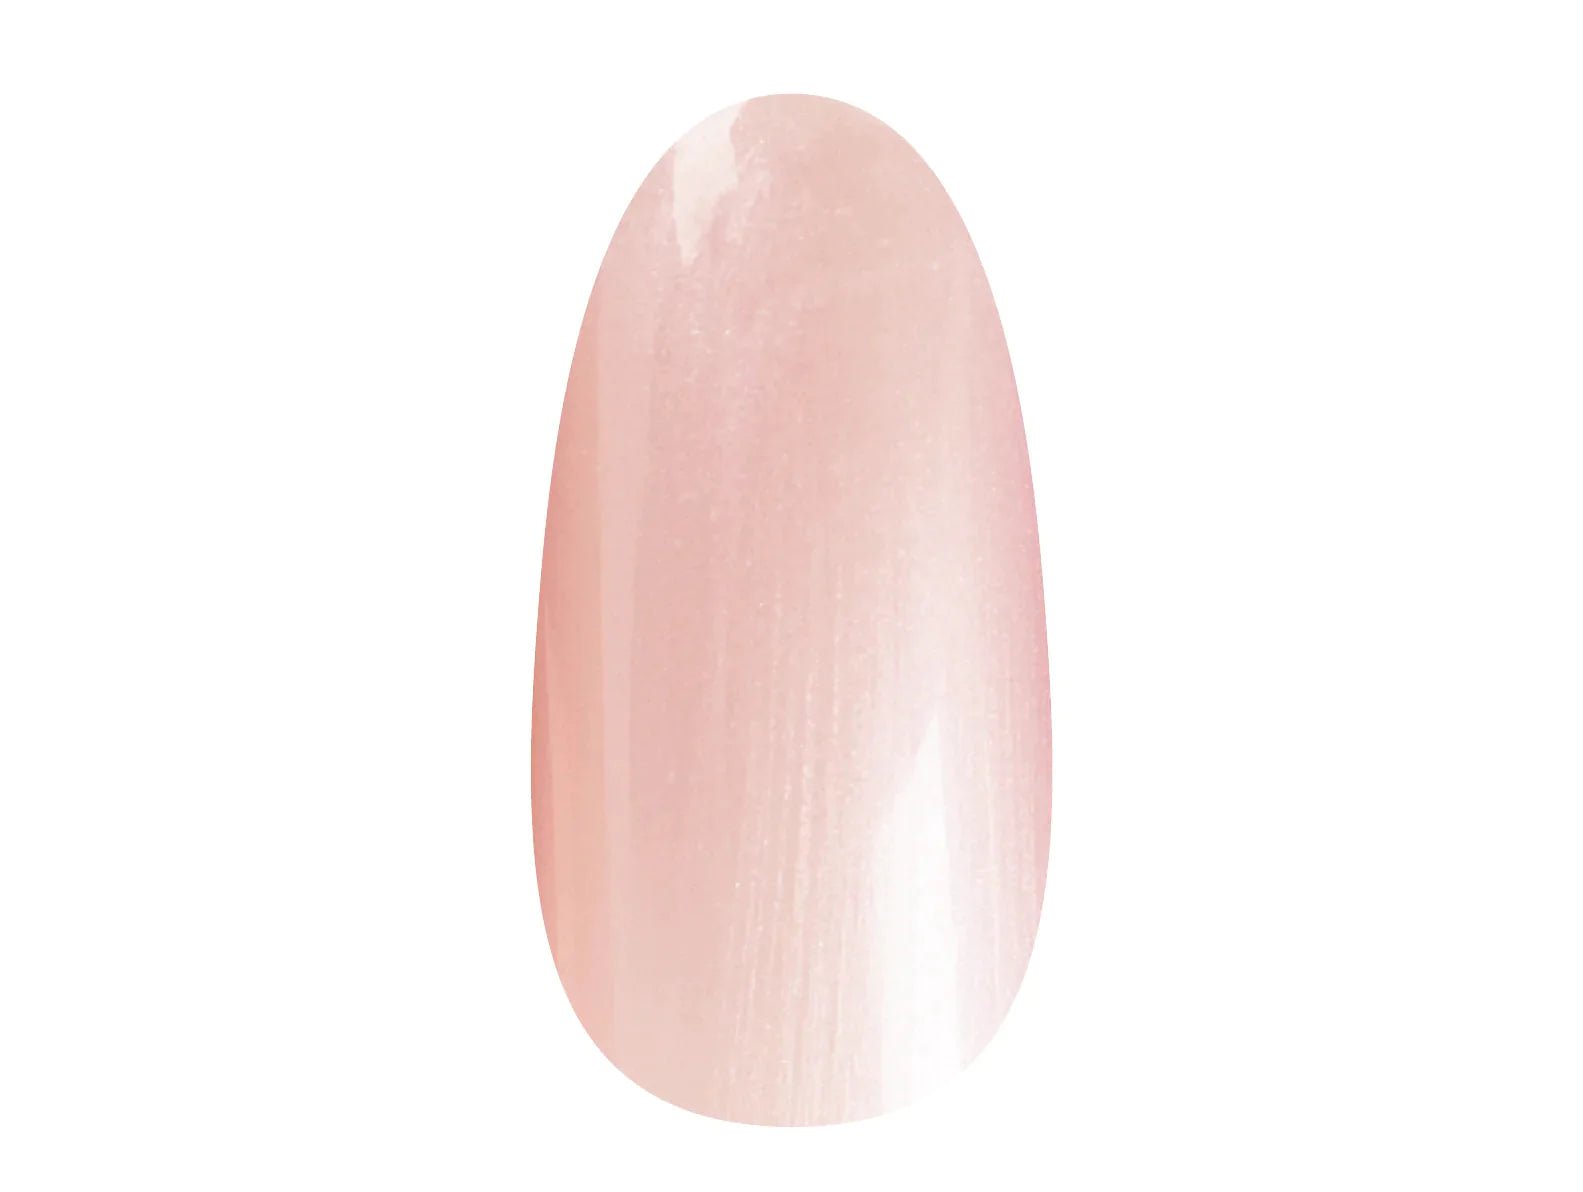 The Sweetest Thing - White with a Shimmer of Pink, UV Gel Polish - 14 Day Manicure - Nail Tip 